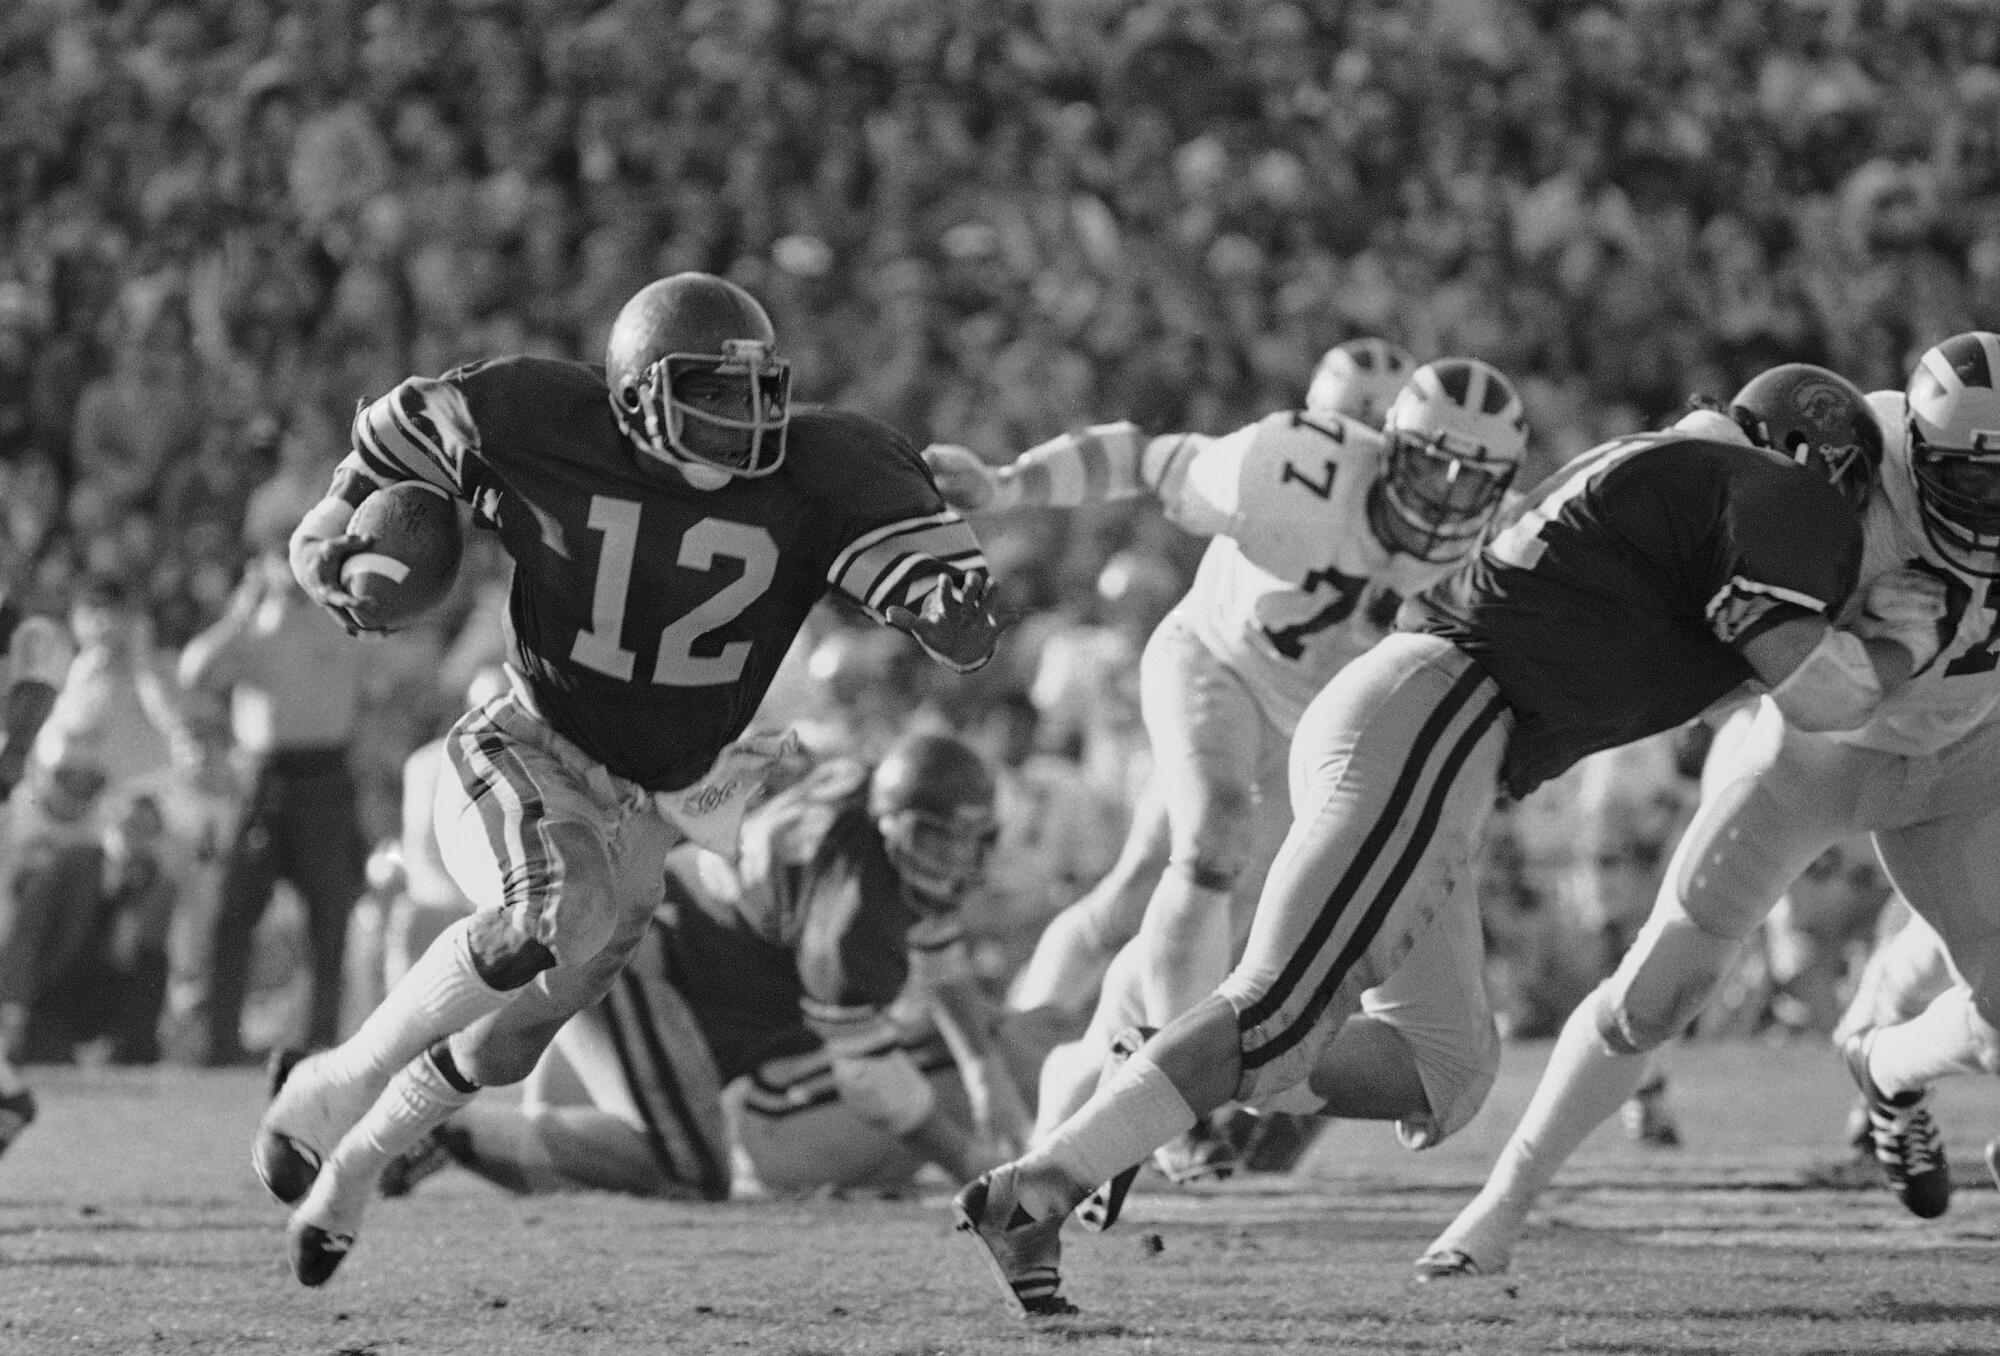 USC running back Charles White sprints past the Michigan defense during the Trojans' win in the 1979 Rose Bowl.